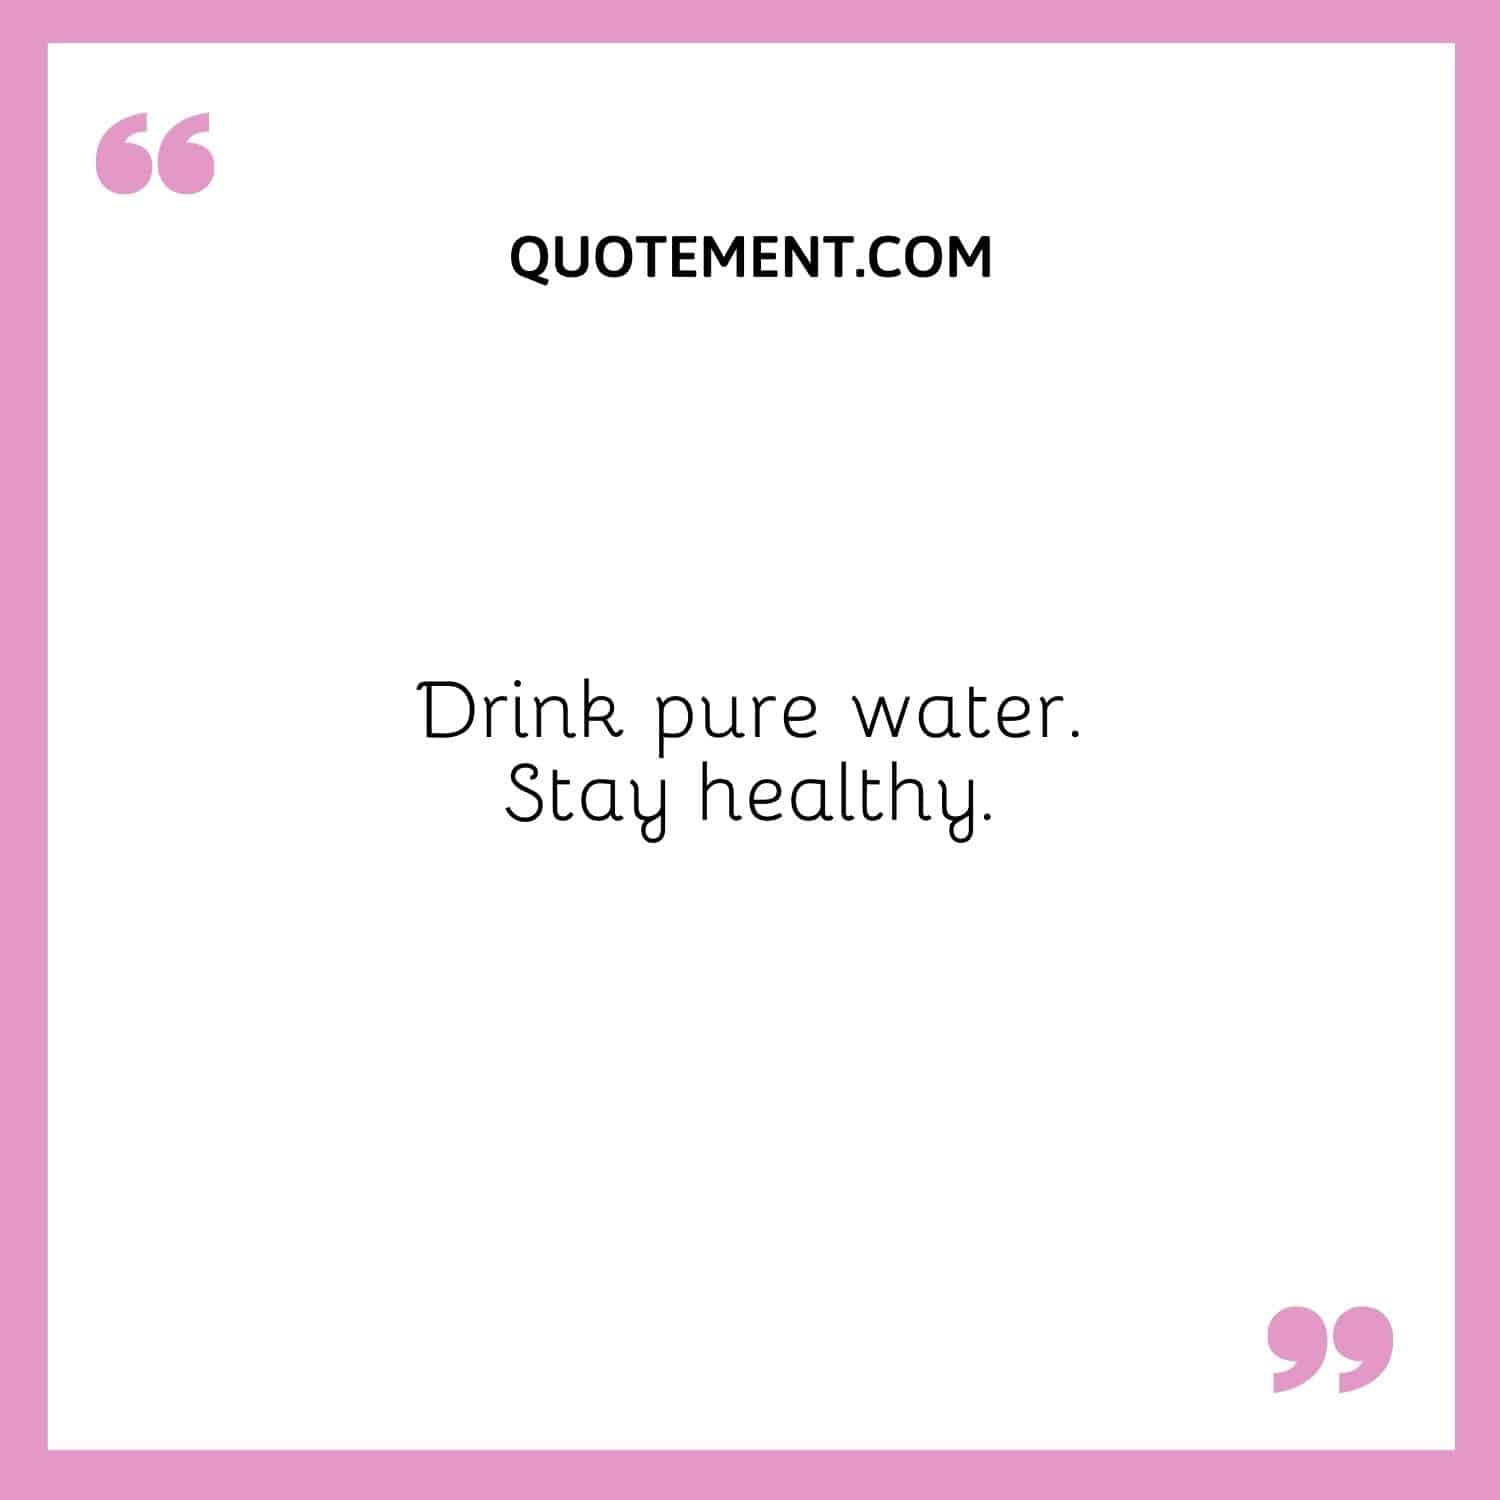 Drink pure water. Stay healthy.